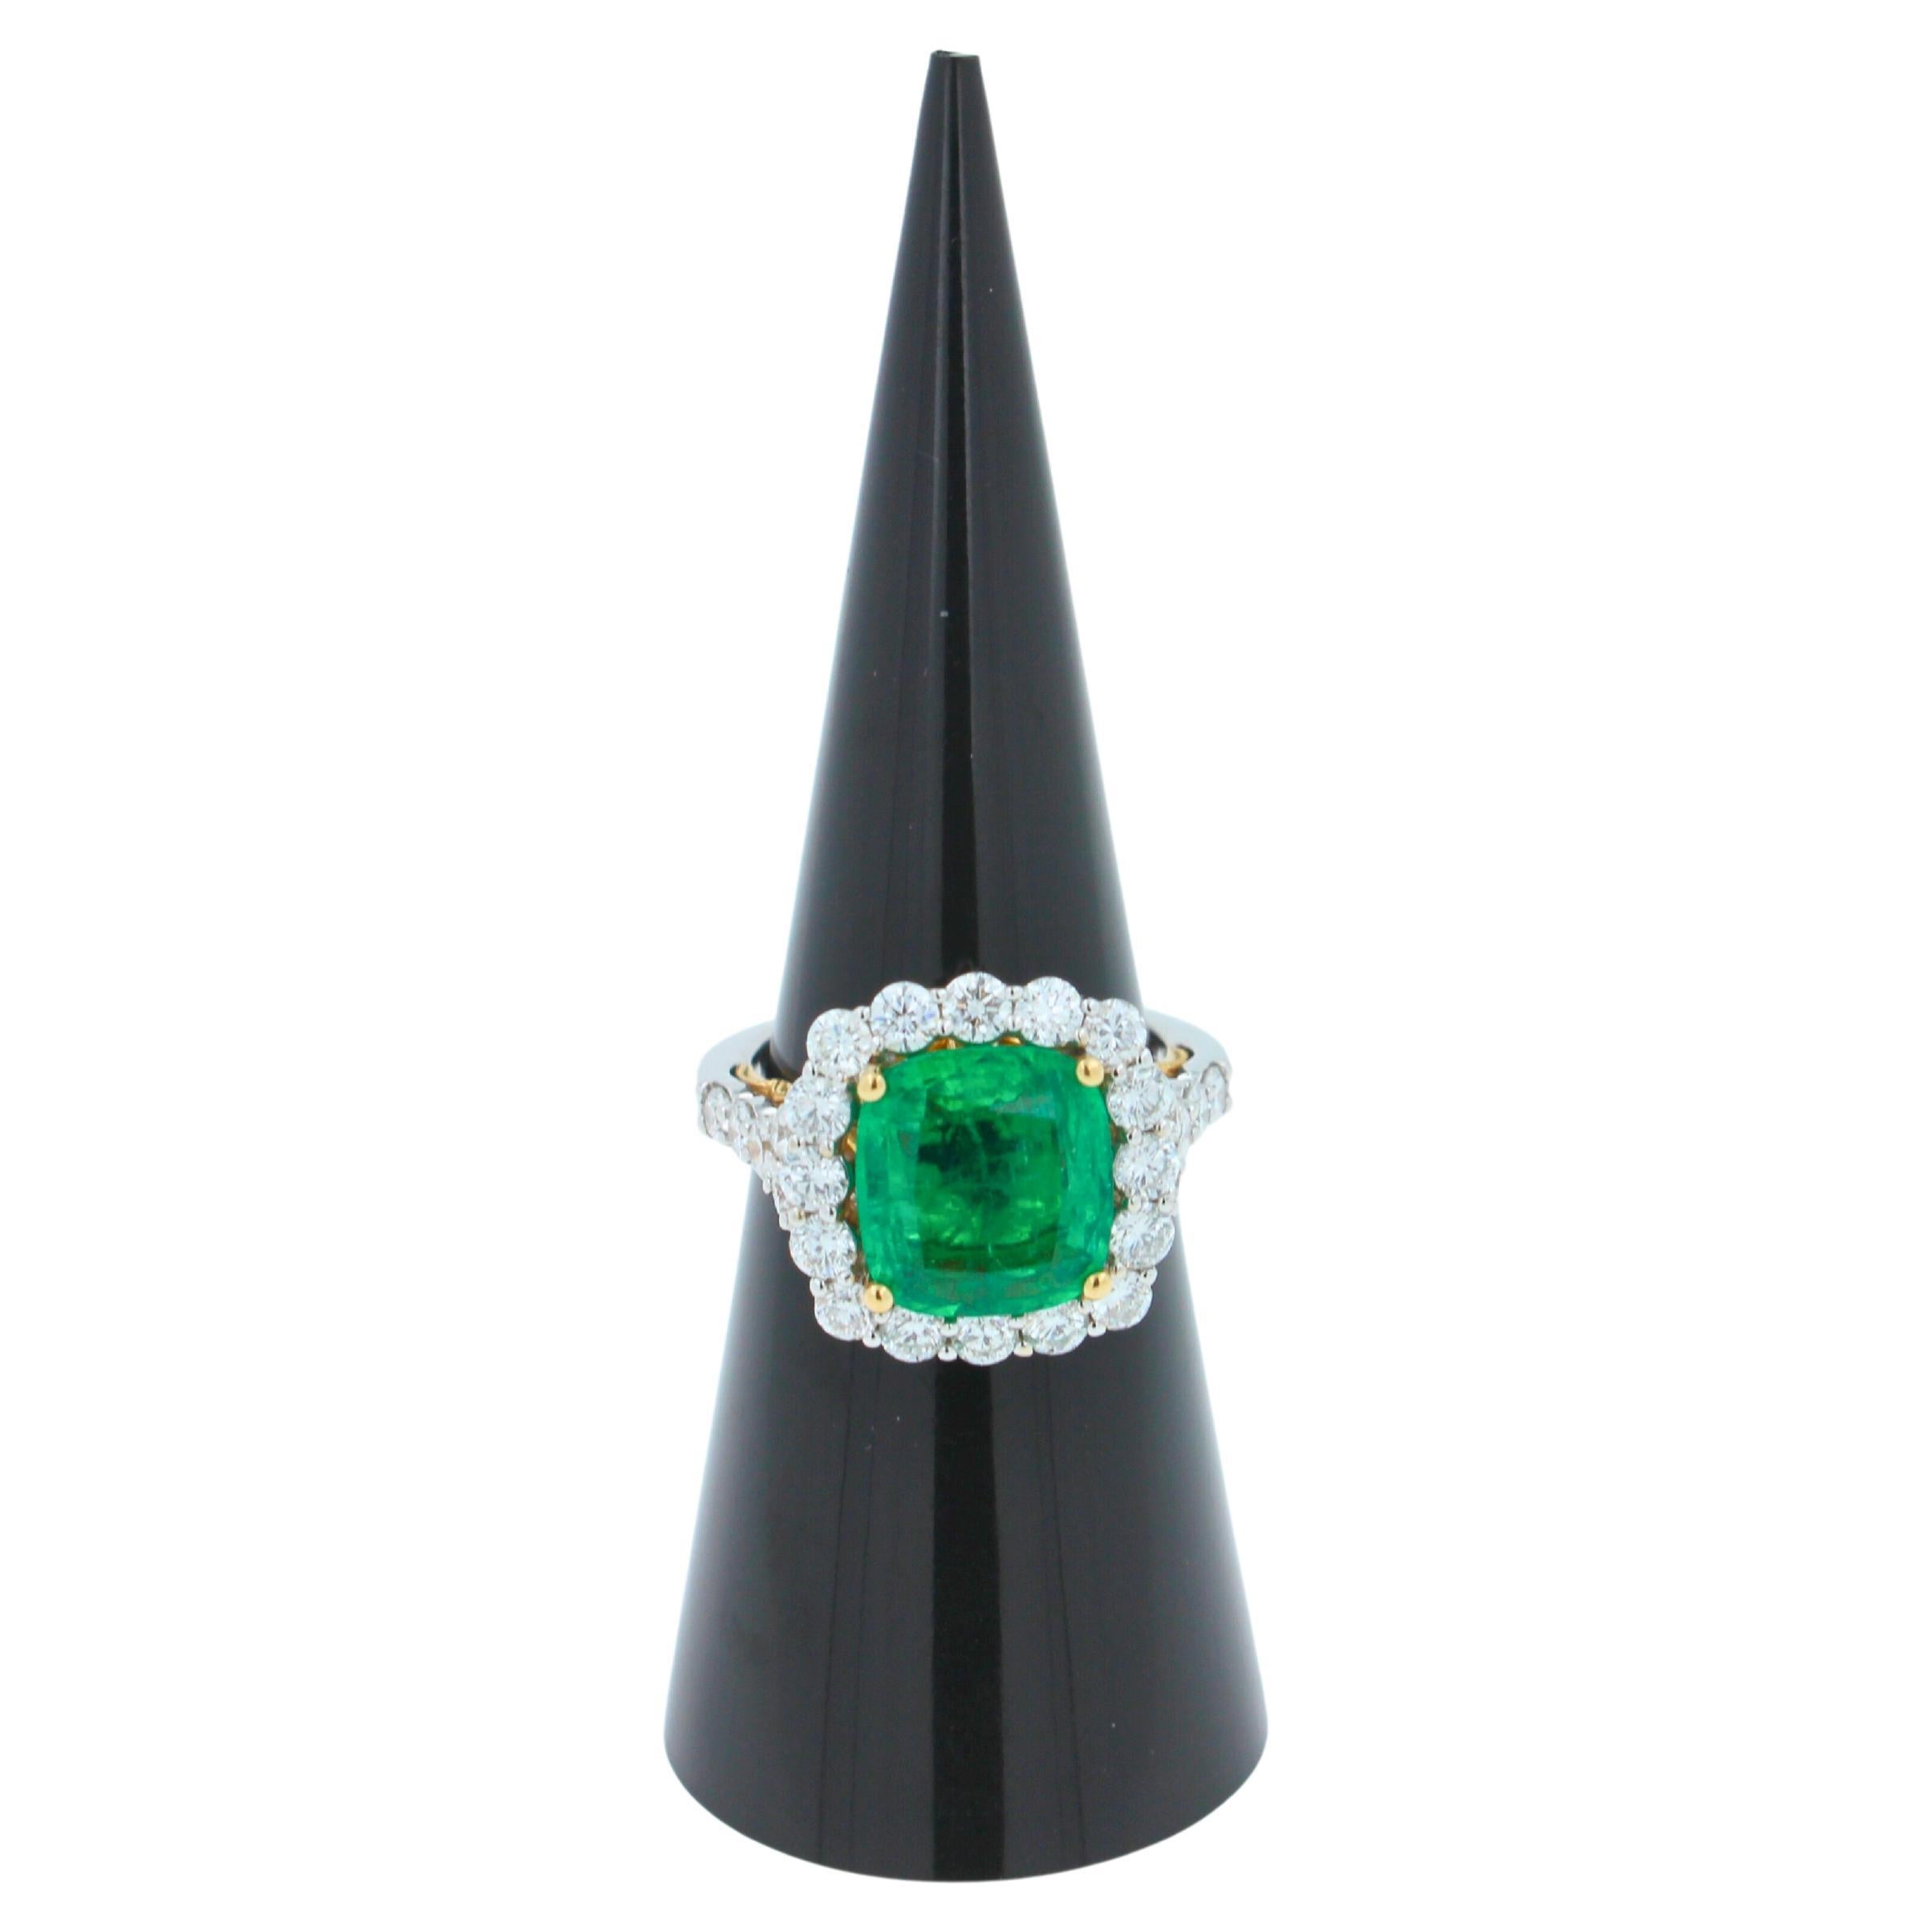 10.70 mm x 9.50 mm Cushion-Cut/Shape Form
Emerald with Medium Light Green Colour & Lively Velvety Hues 
6.50 Carats Emerald
1.70 cts G/VS Diamonds
14K White & Yellow Gold Ring
7.60 grams
Size 6